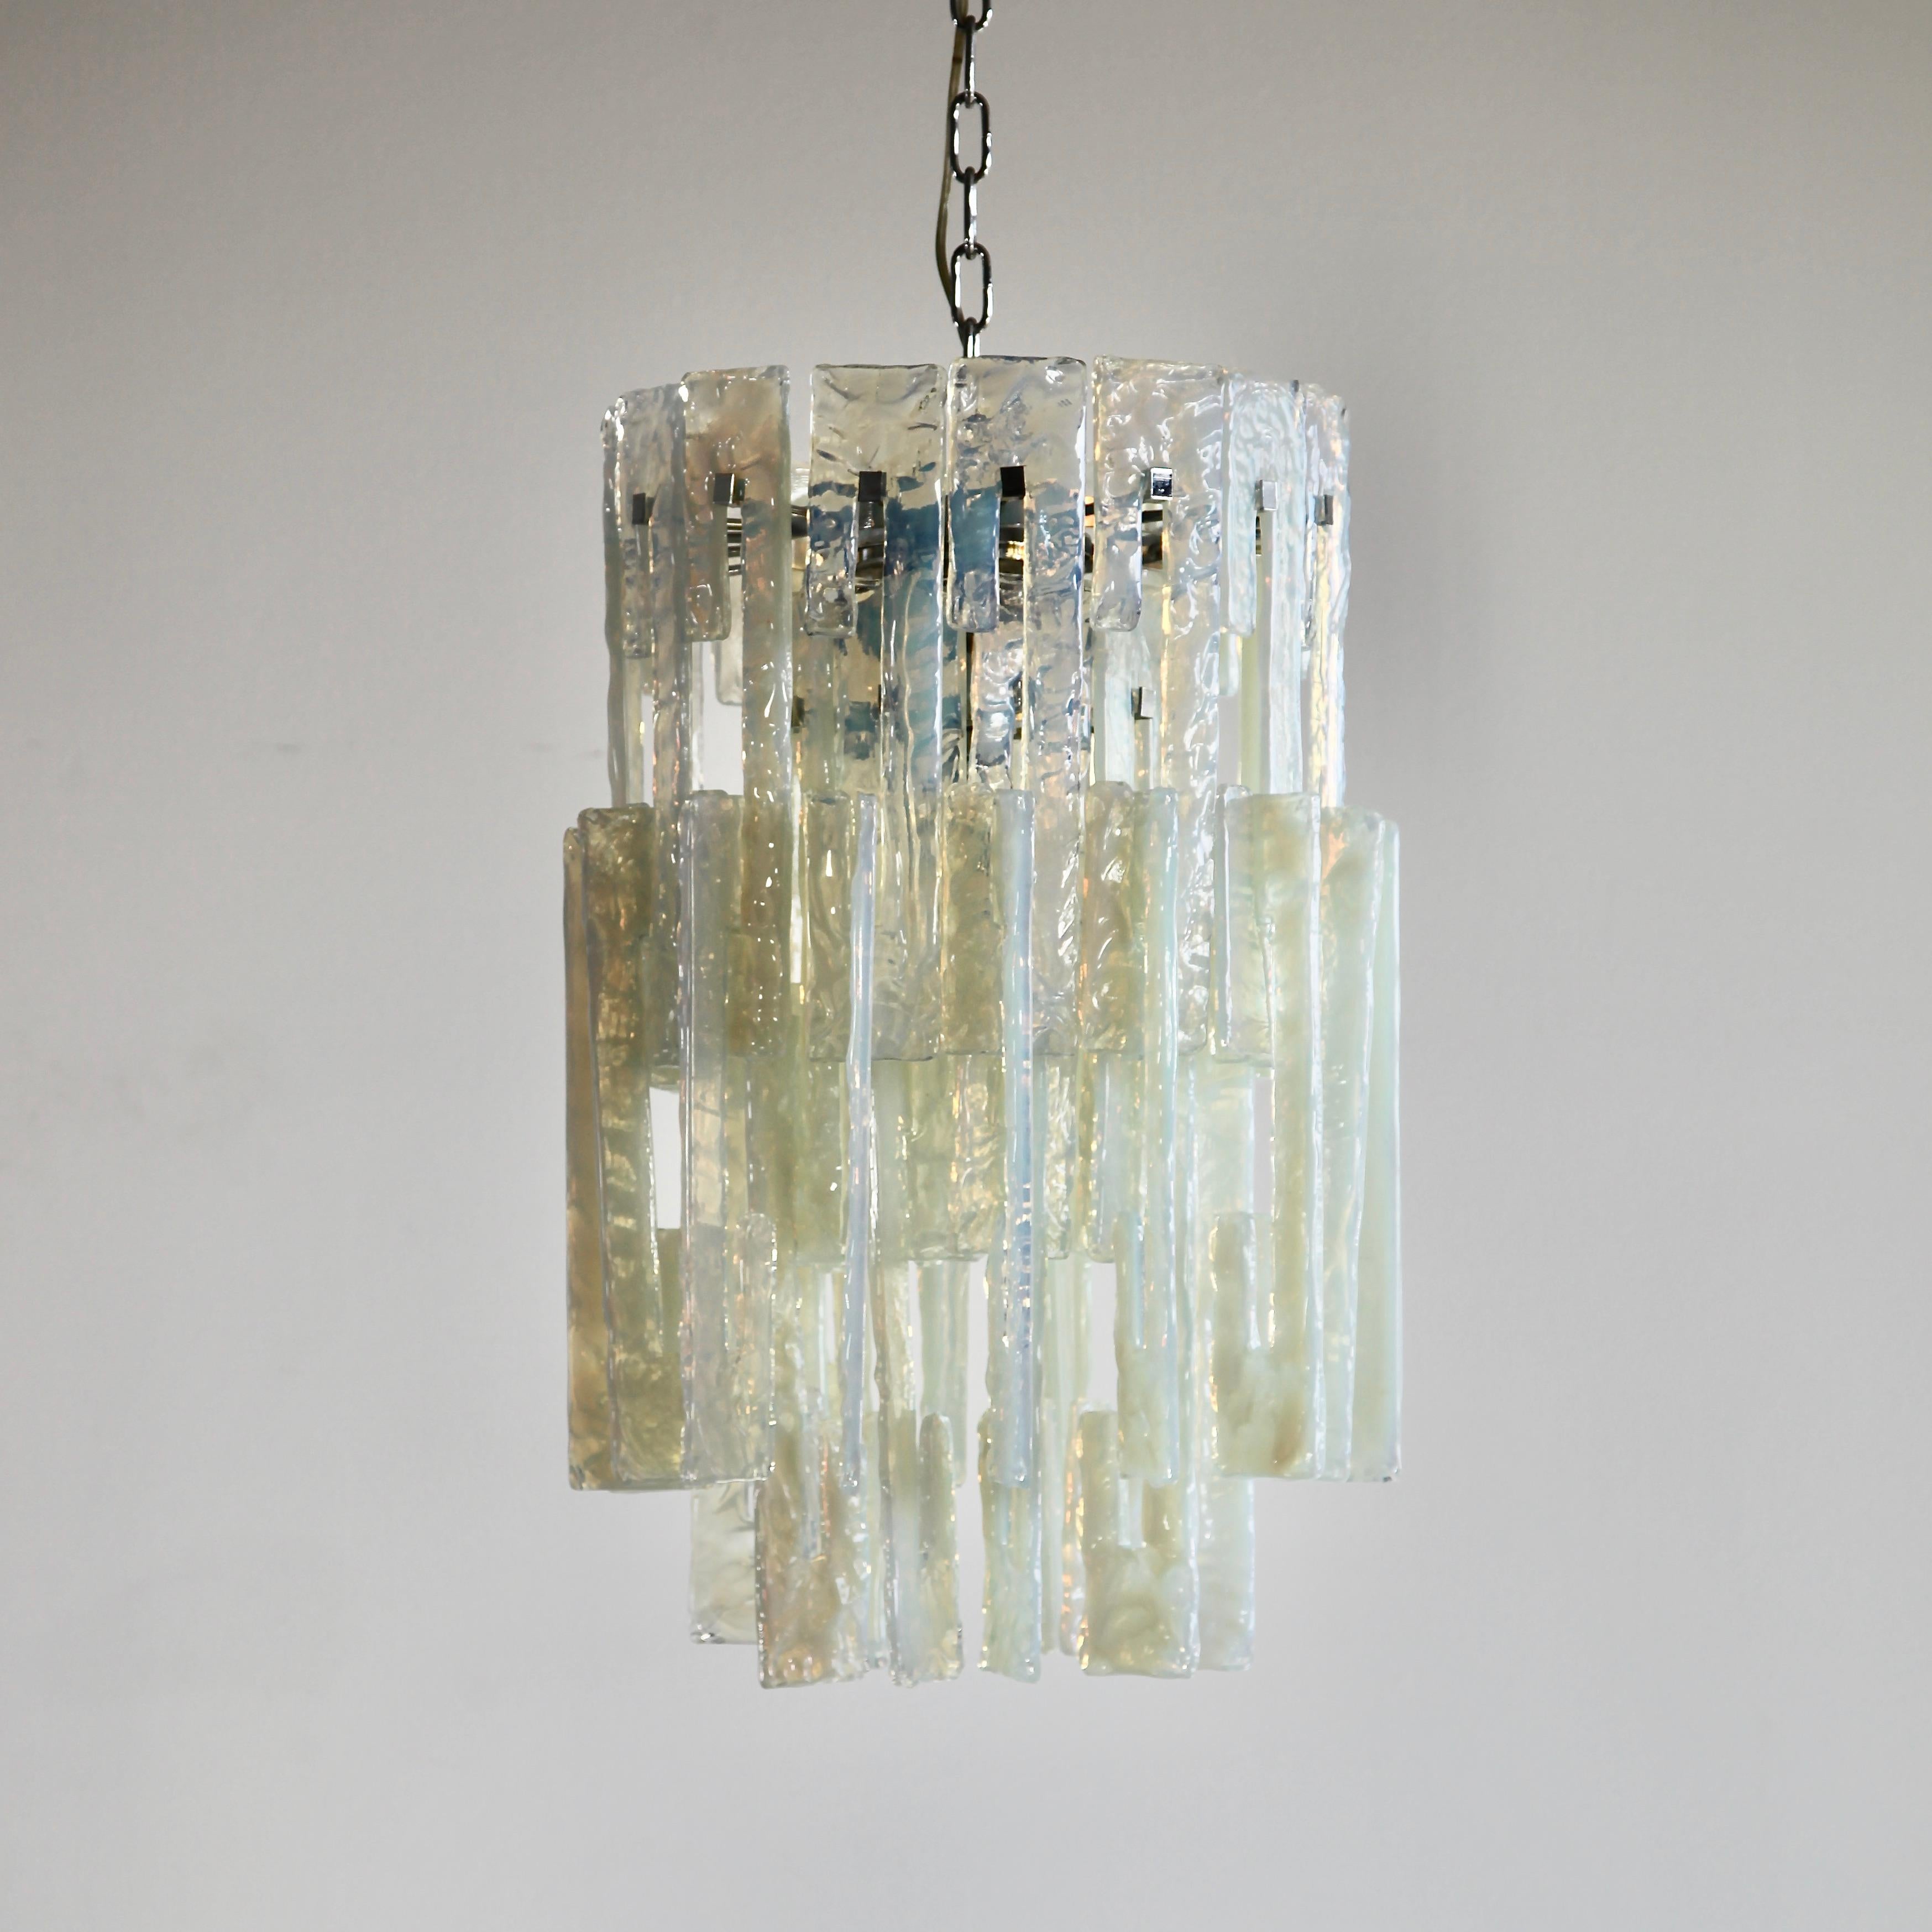 Glass Chandelier by Mazzega. Italy, Murano 1960s.

Vintage hanging lamp comprising of a metal frame and some 52 interlocking glass pieces, hand-made in Murano. Rare chandelier with interlocking opal glass pieces with a hint of green colour. Four